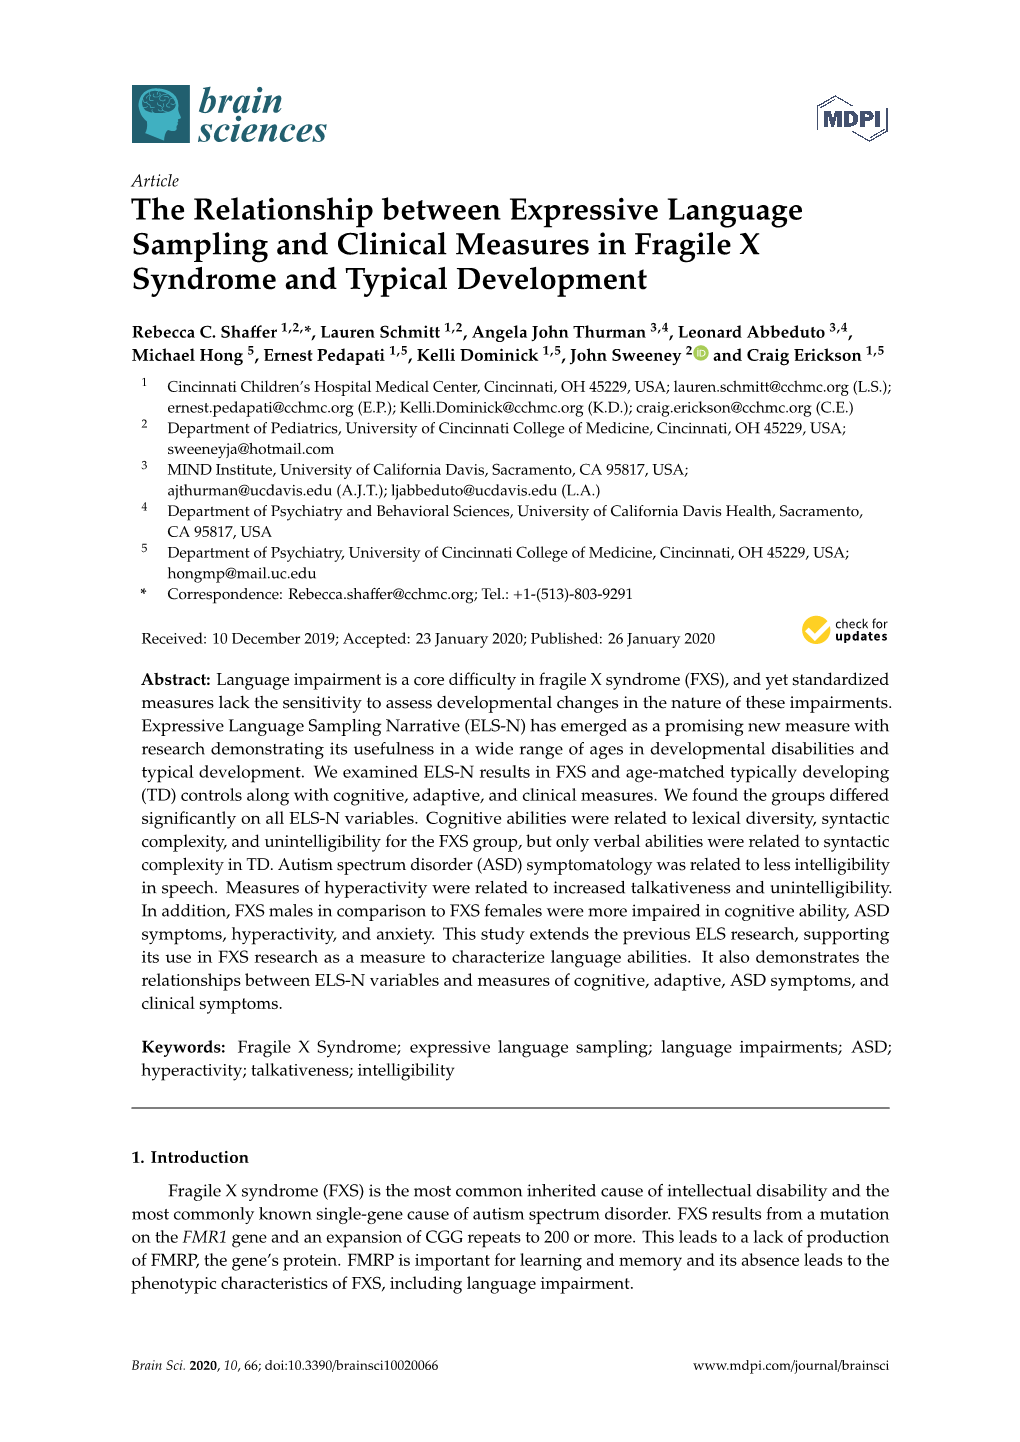 The Relationship Between Expressive Language Sampling and Clinical Measures in Fragile X Syndrome and Typical Development